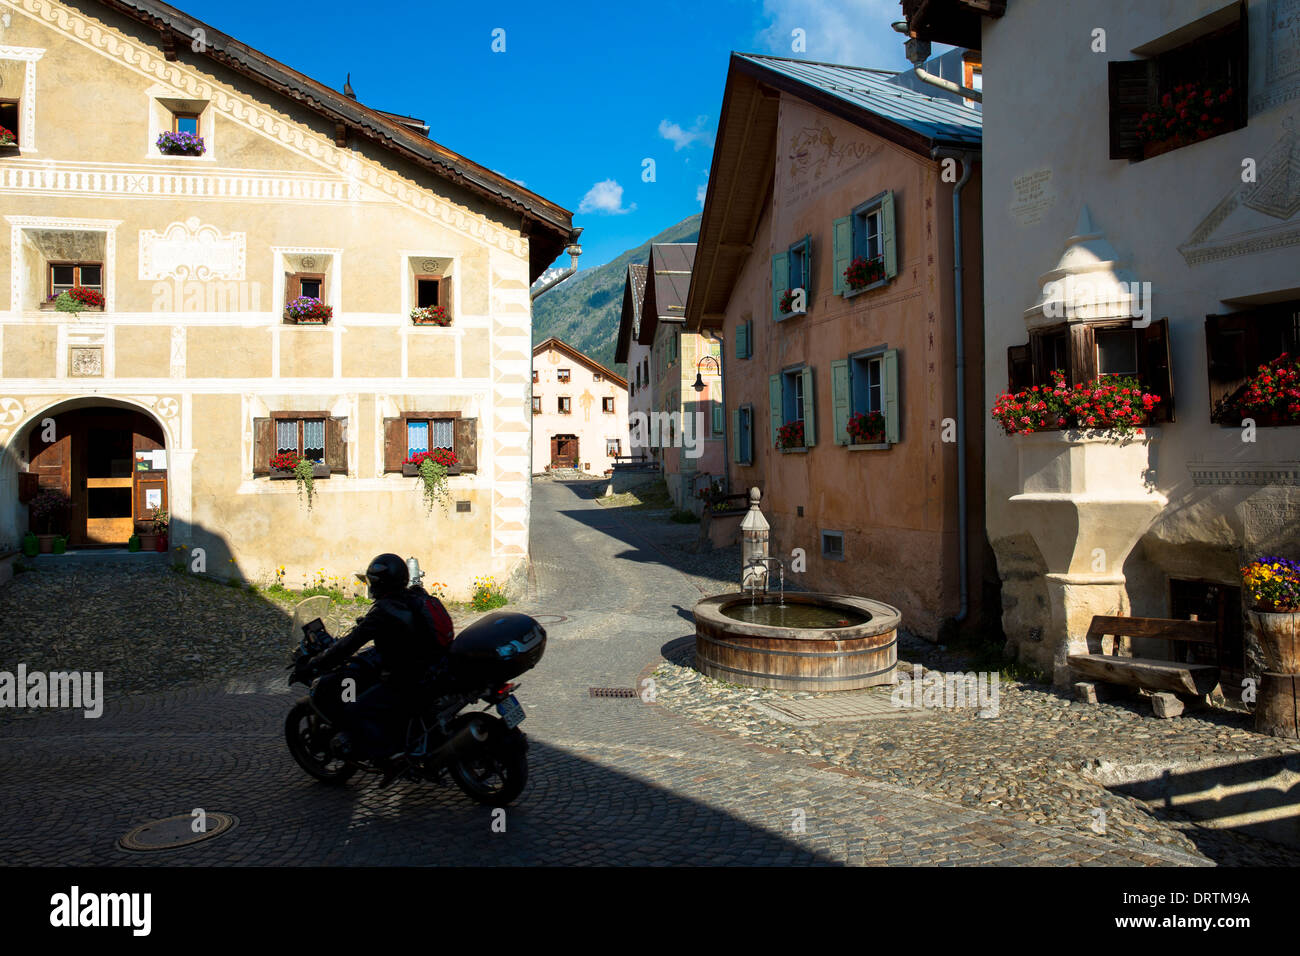 Motorcycling in the Engadine Valley, the village of Guarda with old painted stone 17th Century buildings, Switzerland Stock Photo